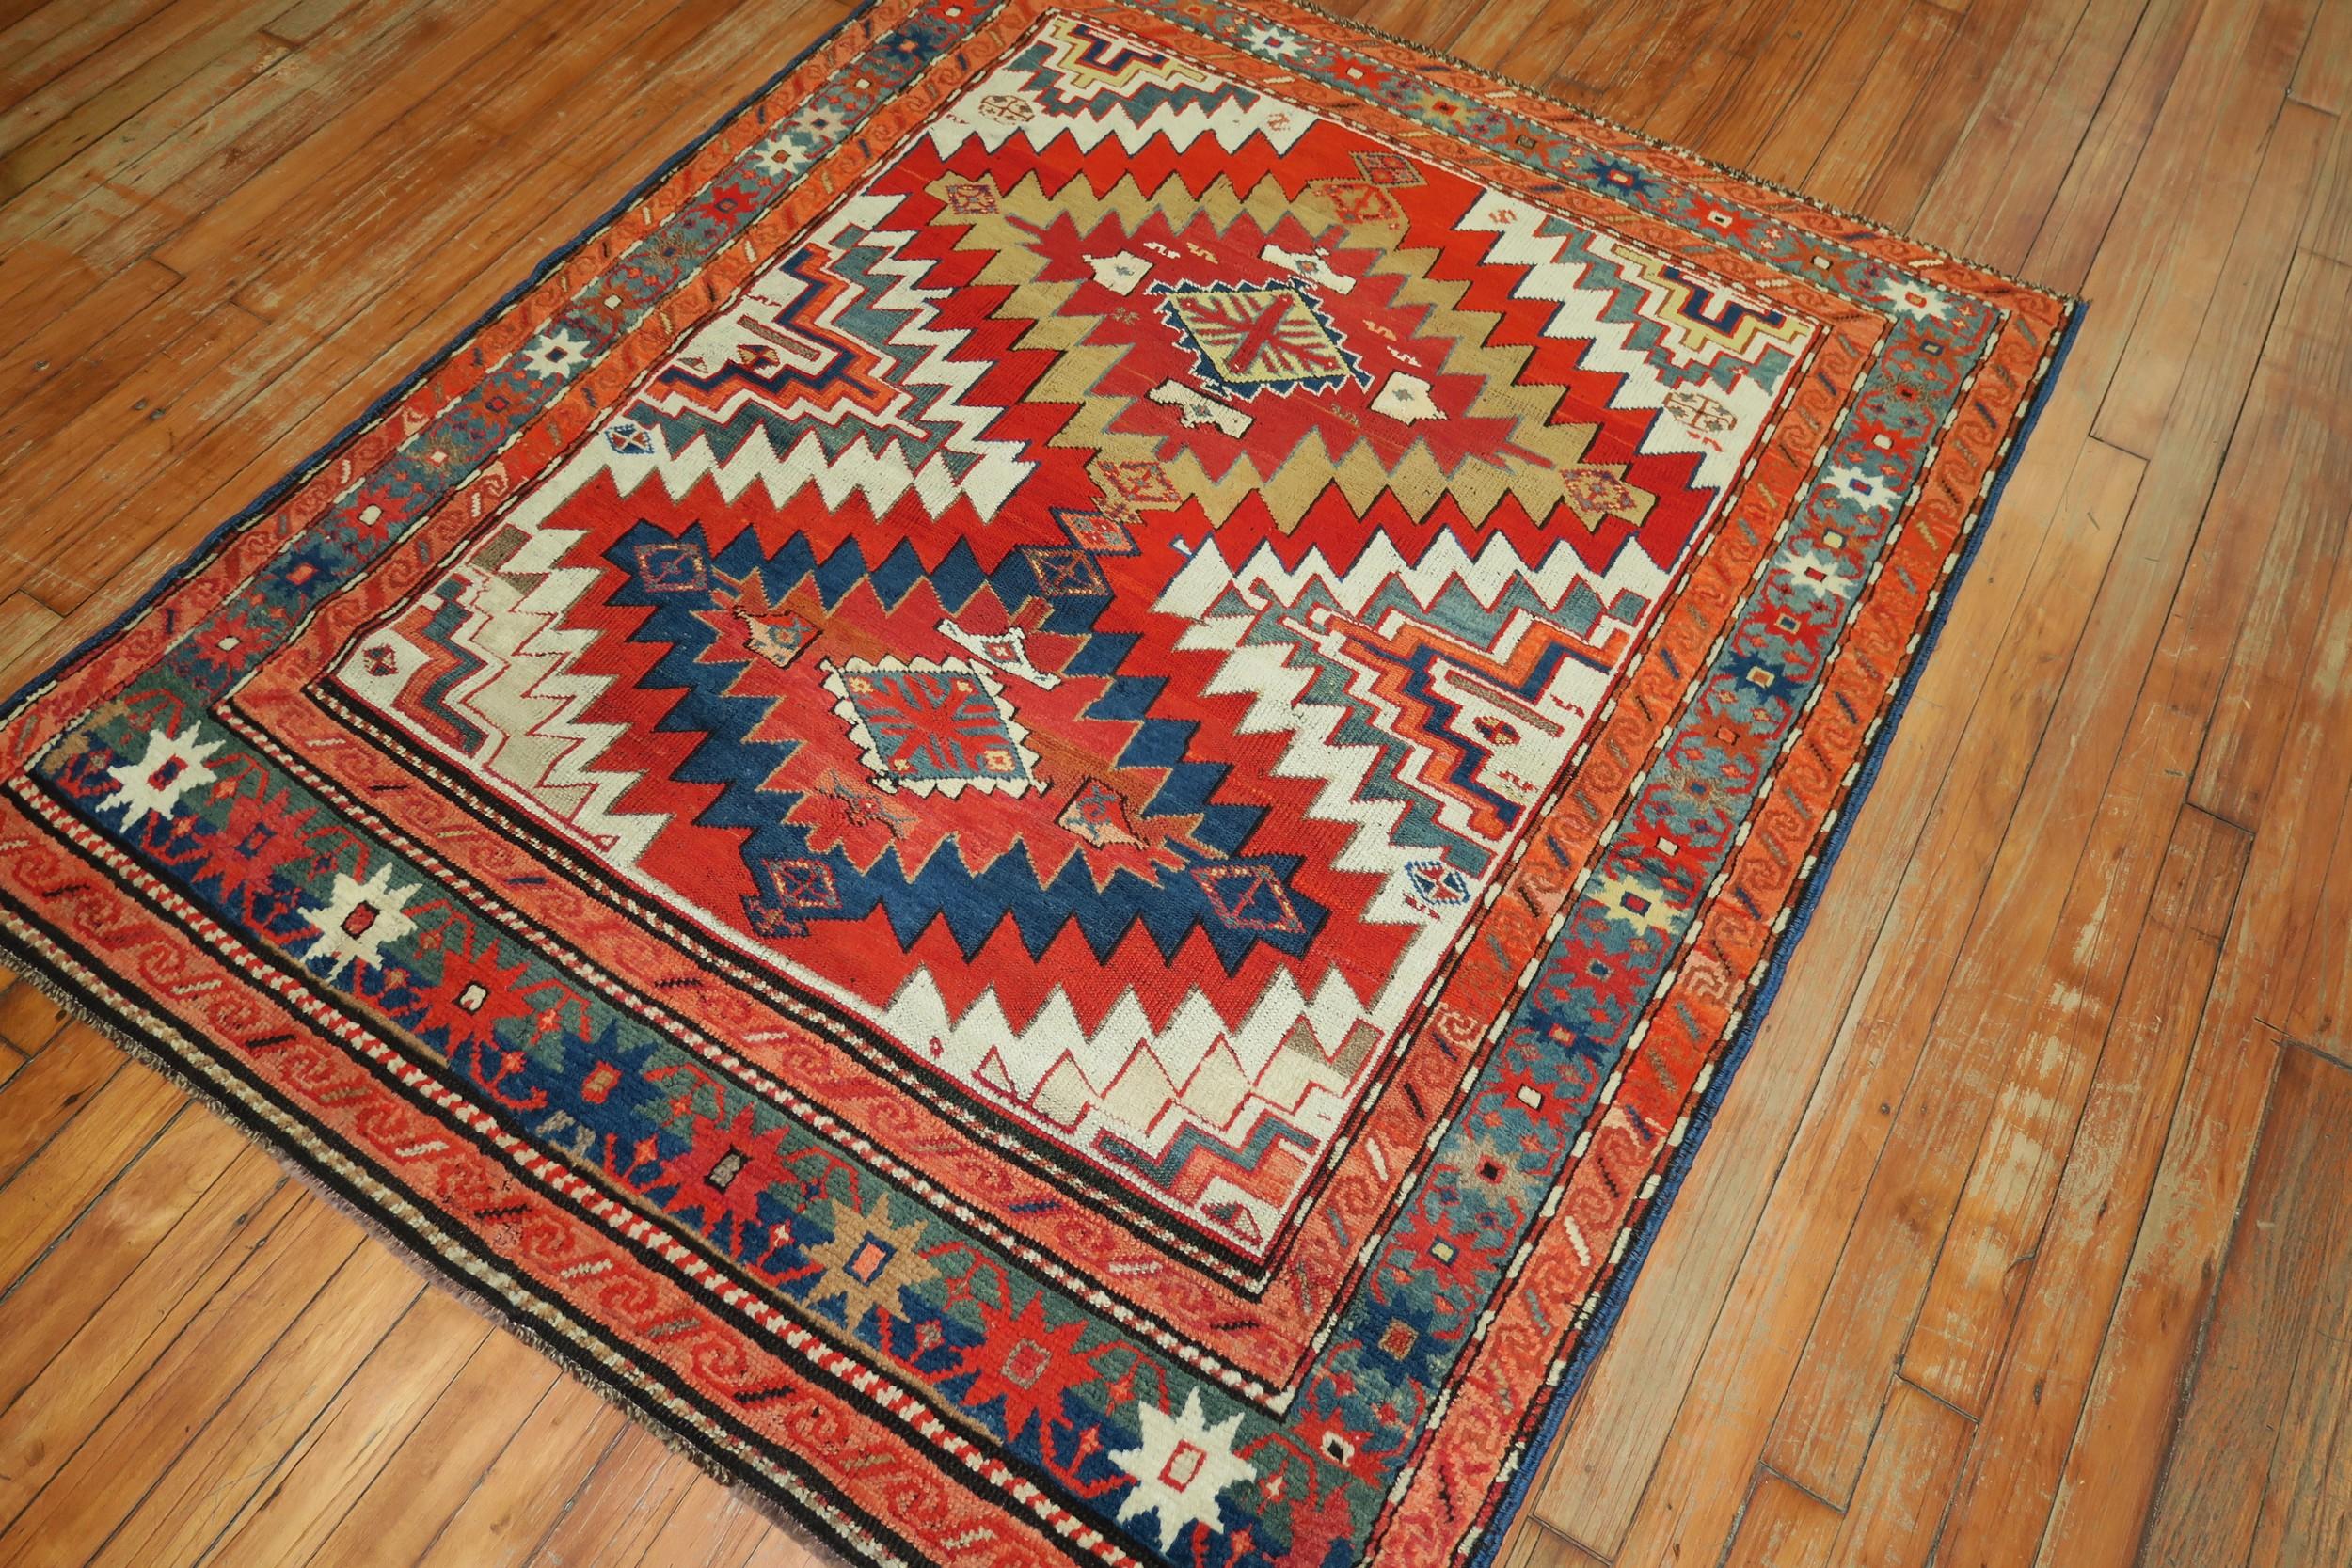 An early 20th century geometric Karabagh rug with coral blue, green accents on an ivory ground, circa 1920.

Measures: 4'3